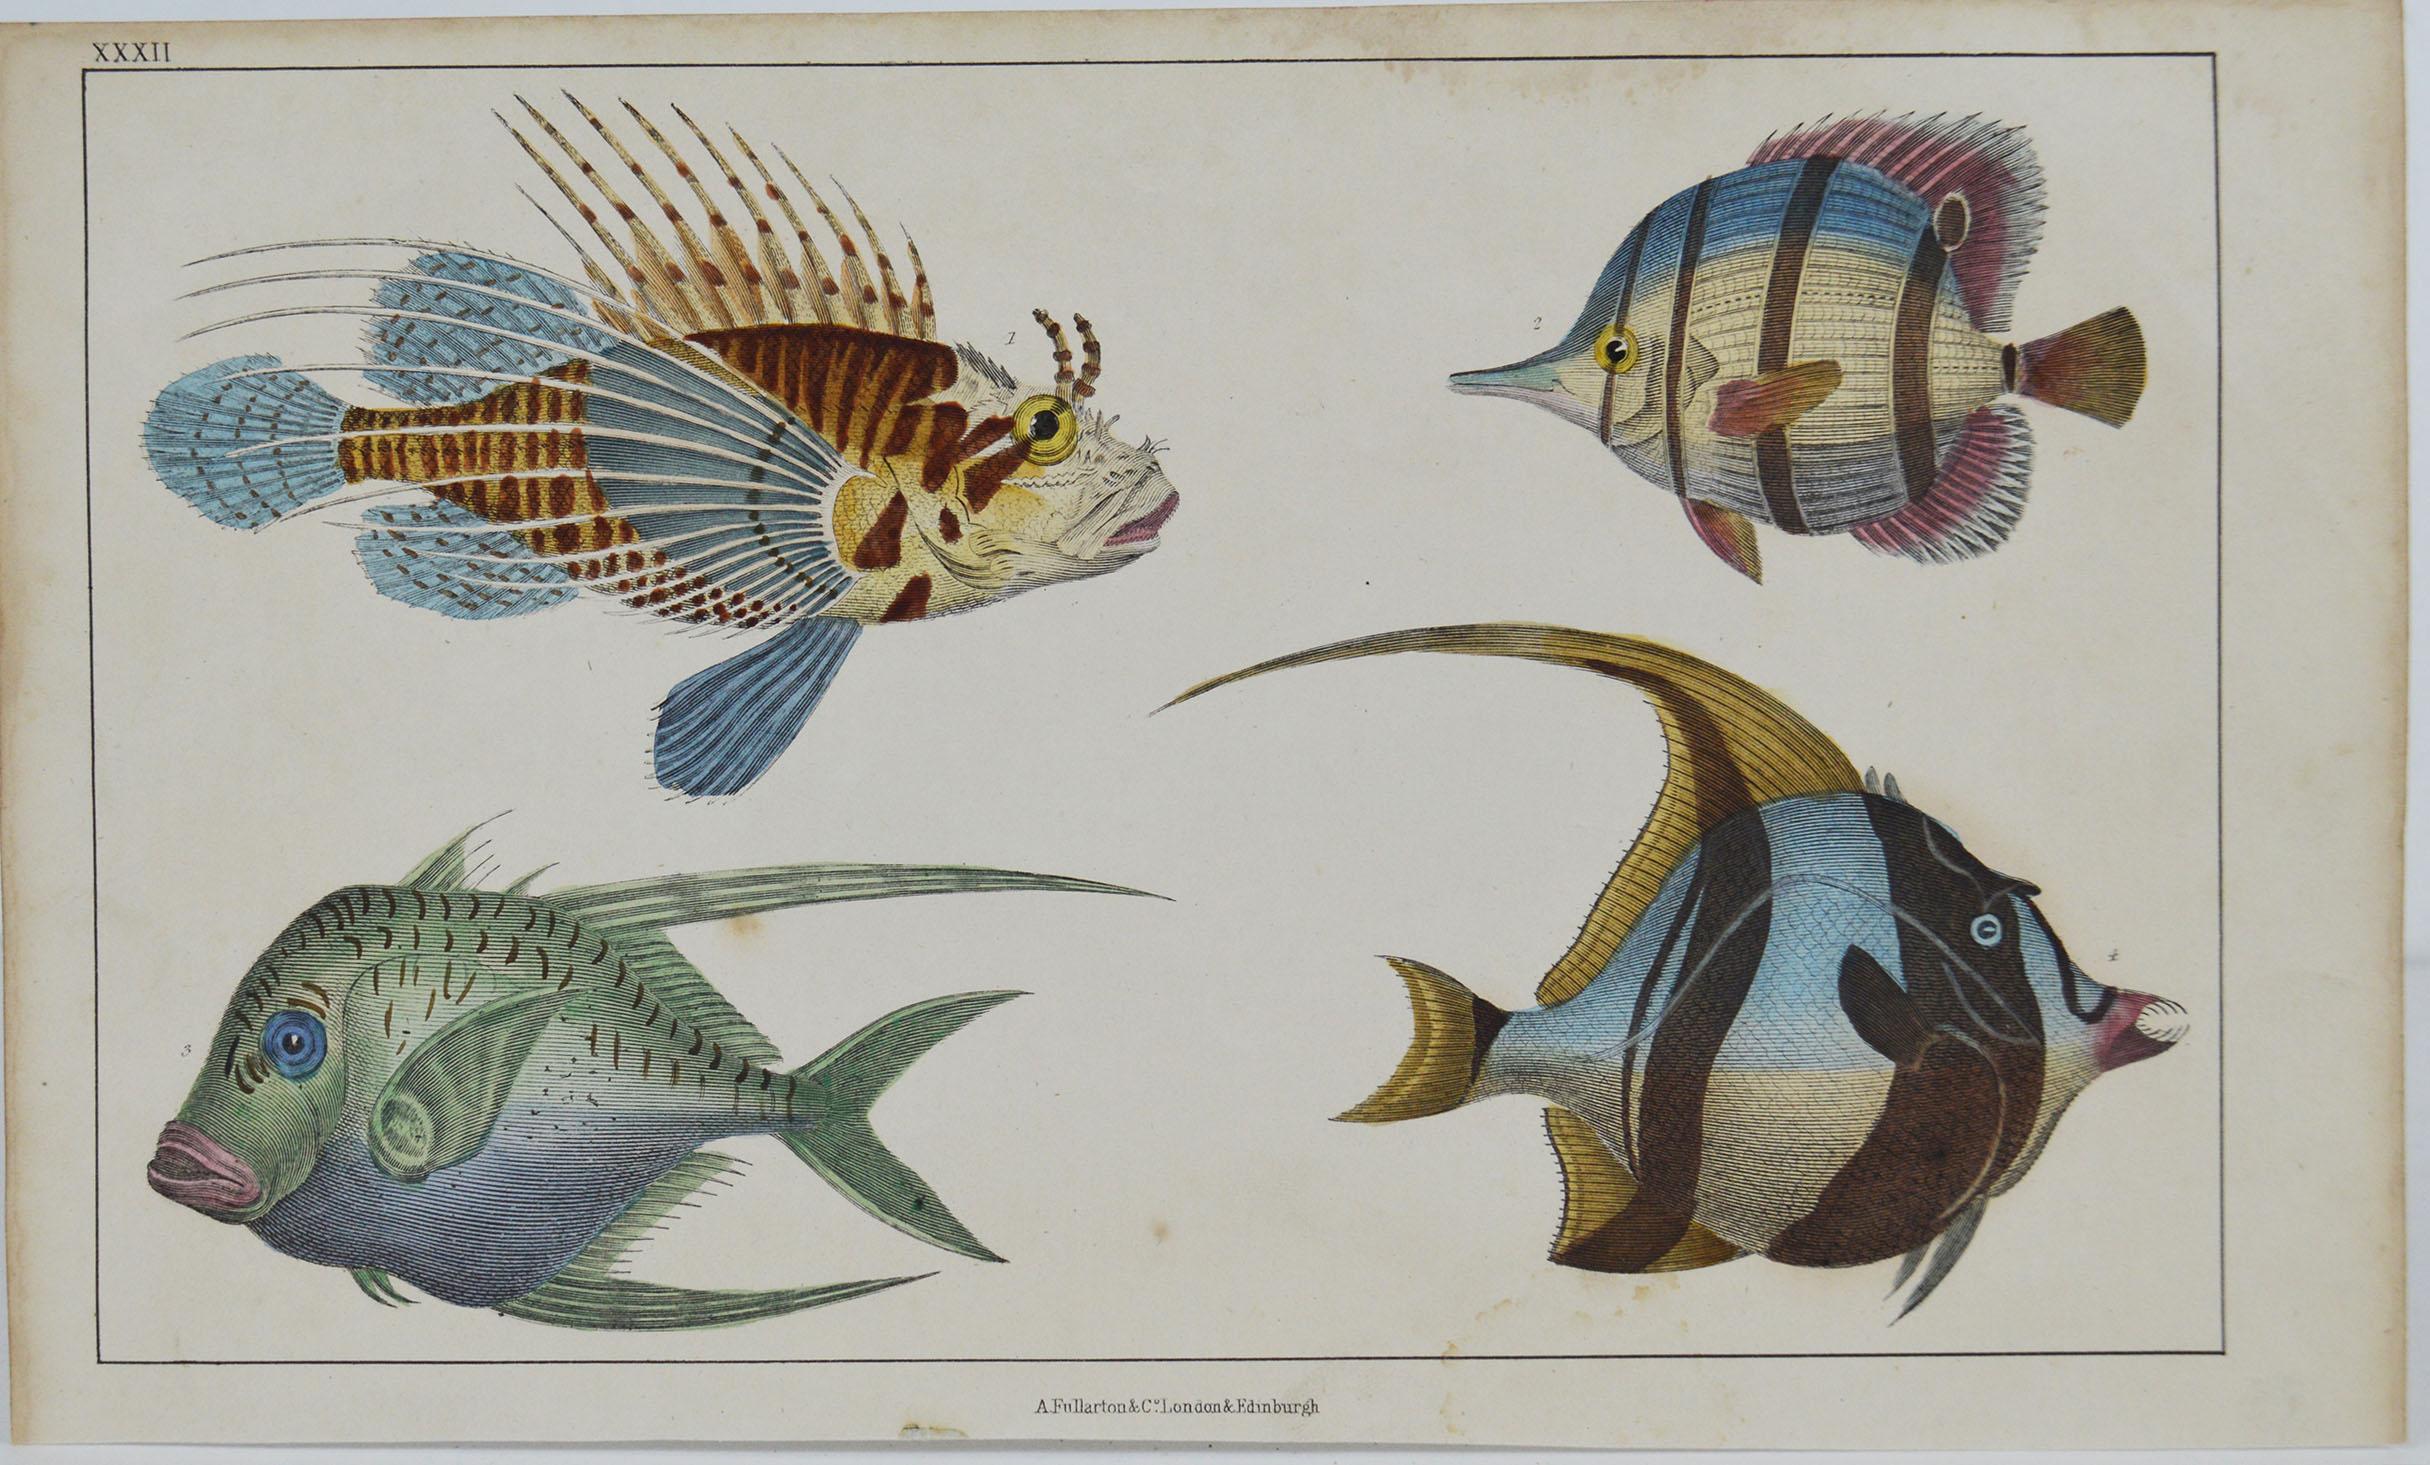 Great image of fish.

I have listed several loose natural history prints in the same series.

Unframed. It gives you the option of perhaps making a set up using your own choice of frames.

Lithograph after Cpt. Brown with original hand